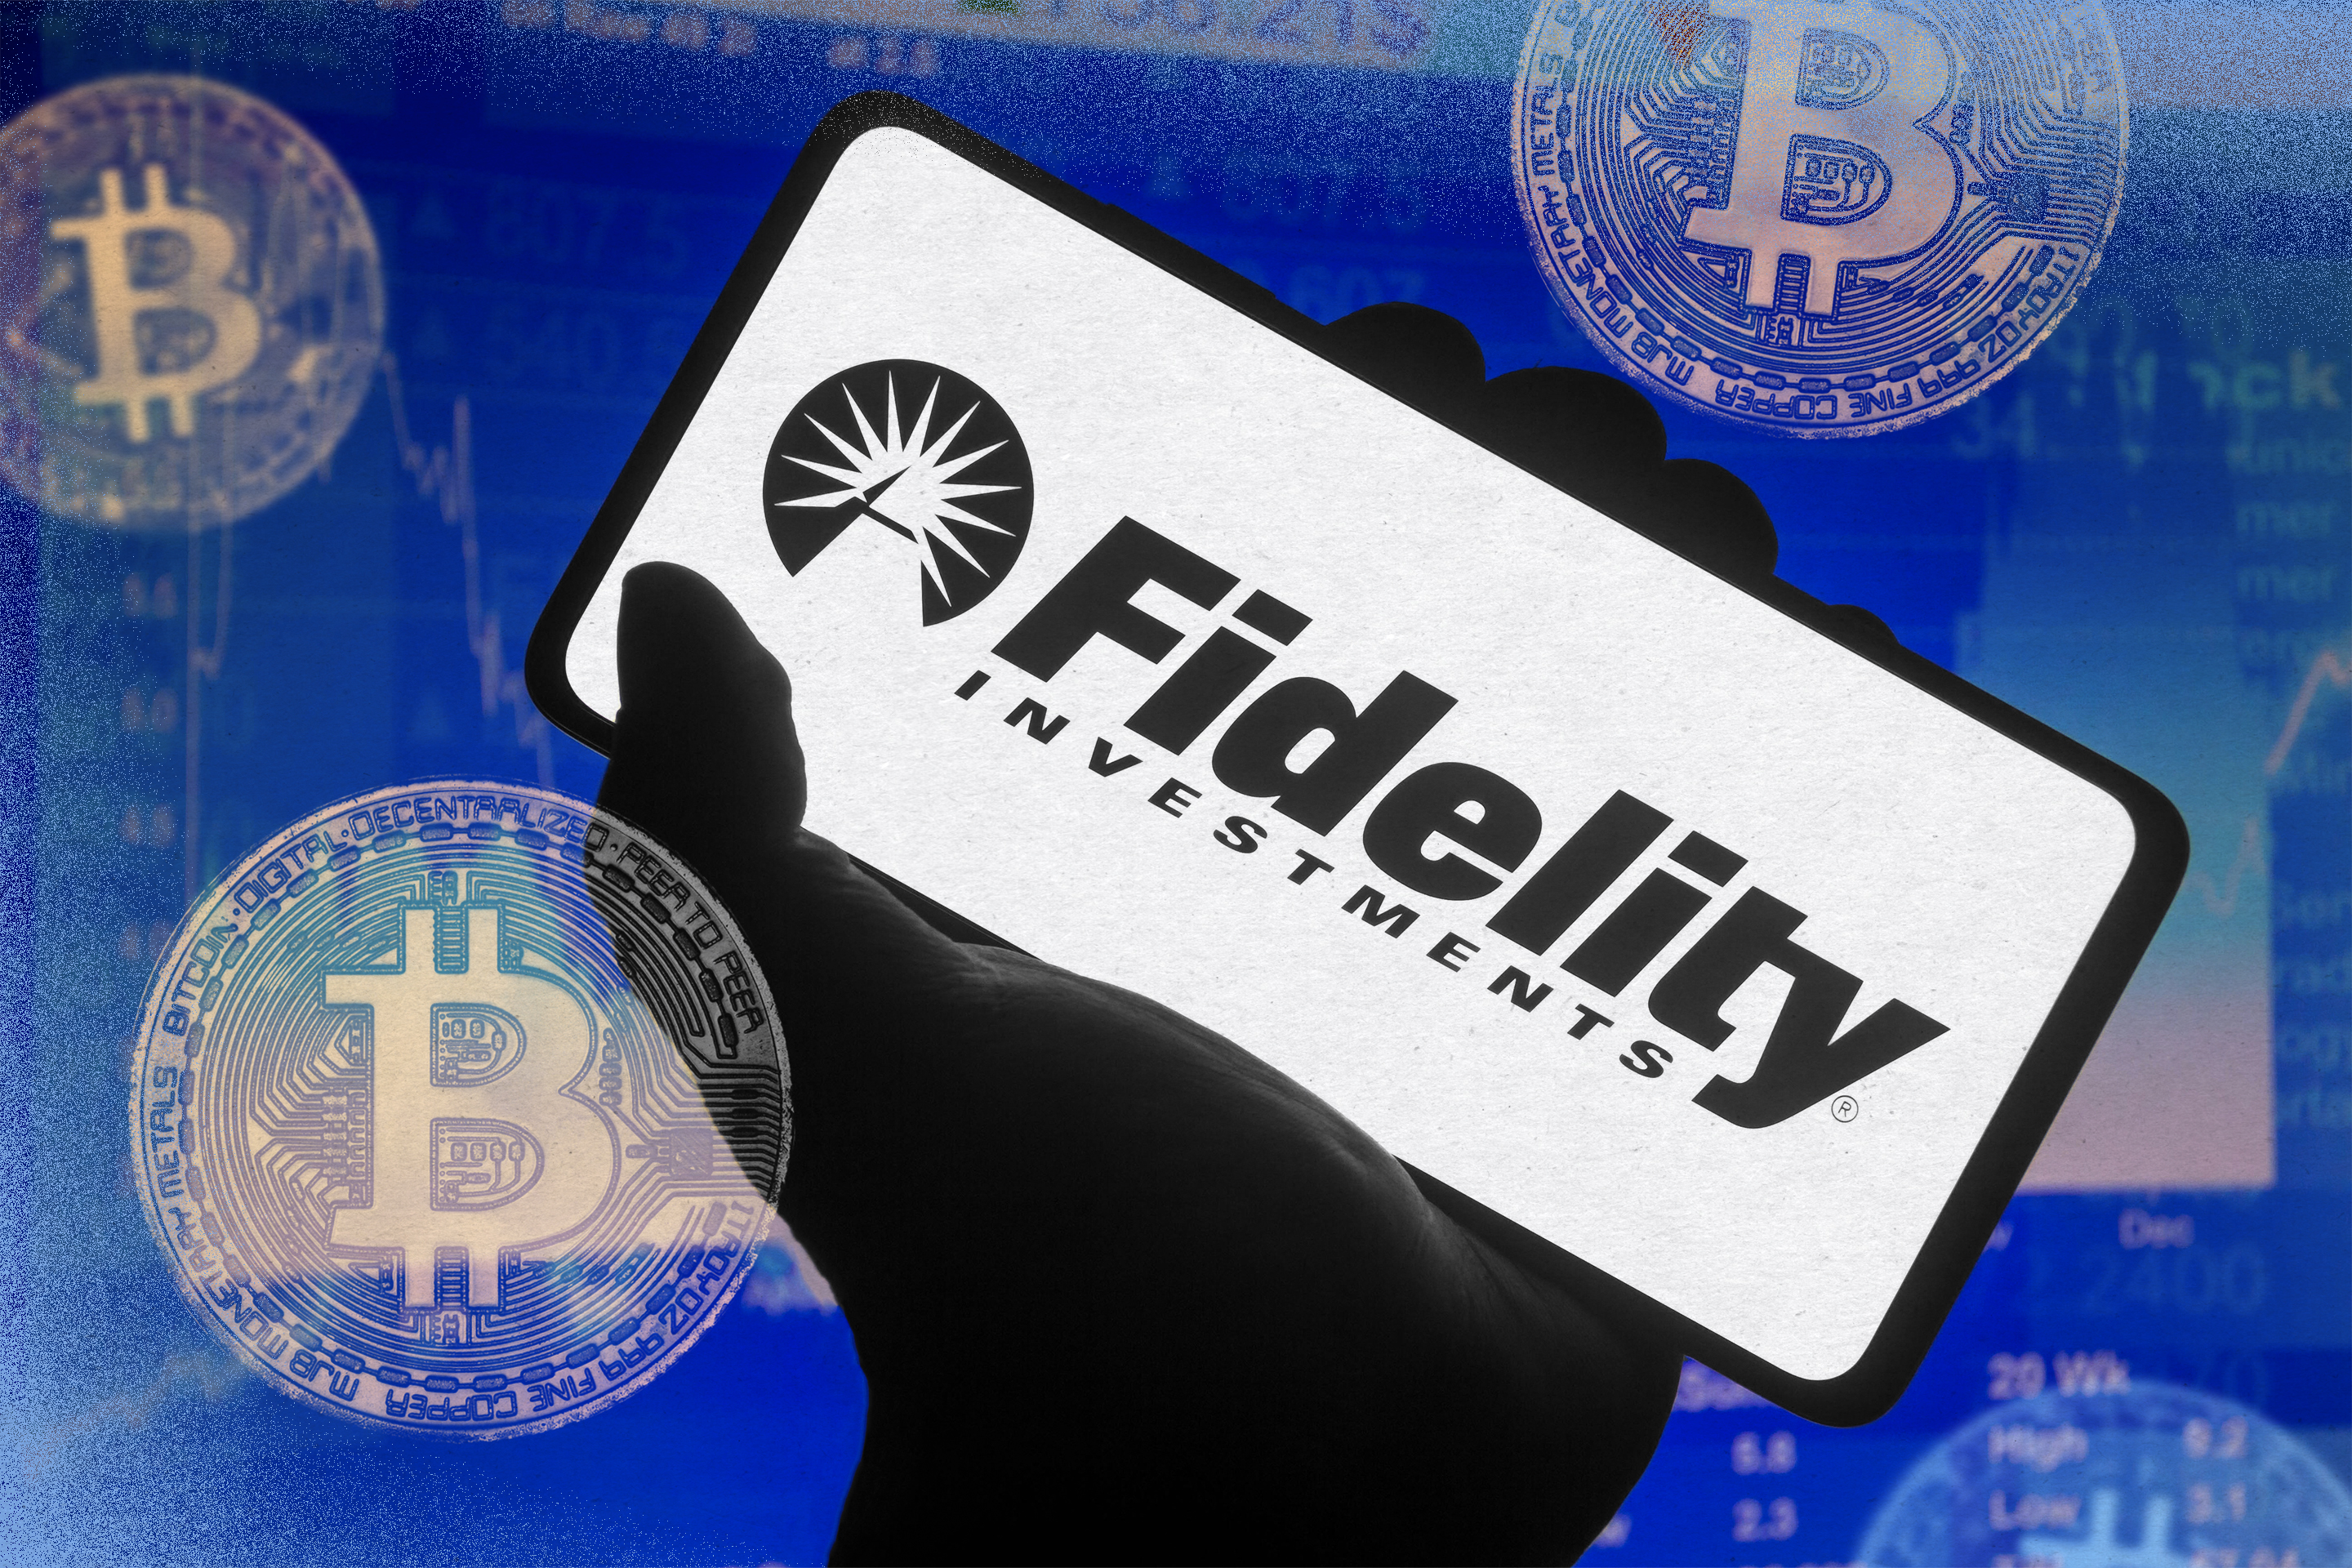 How Does the Fidelity (k) That Allows Crypto Work?